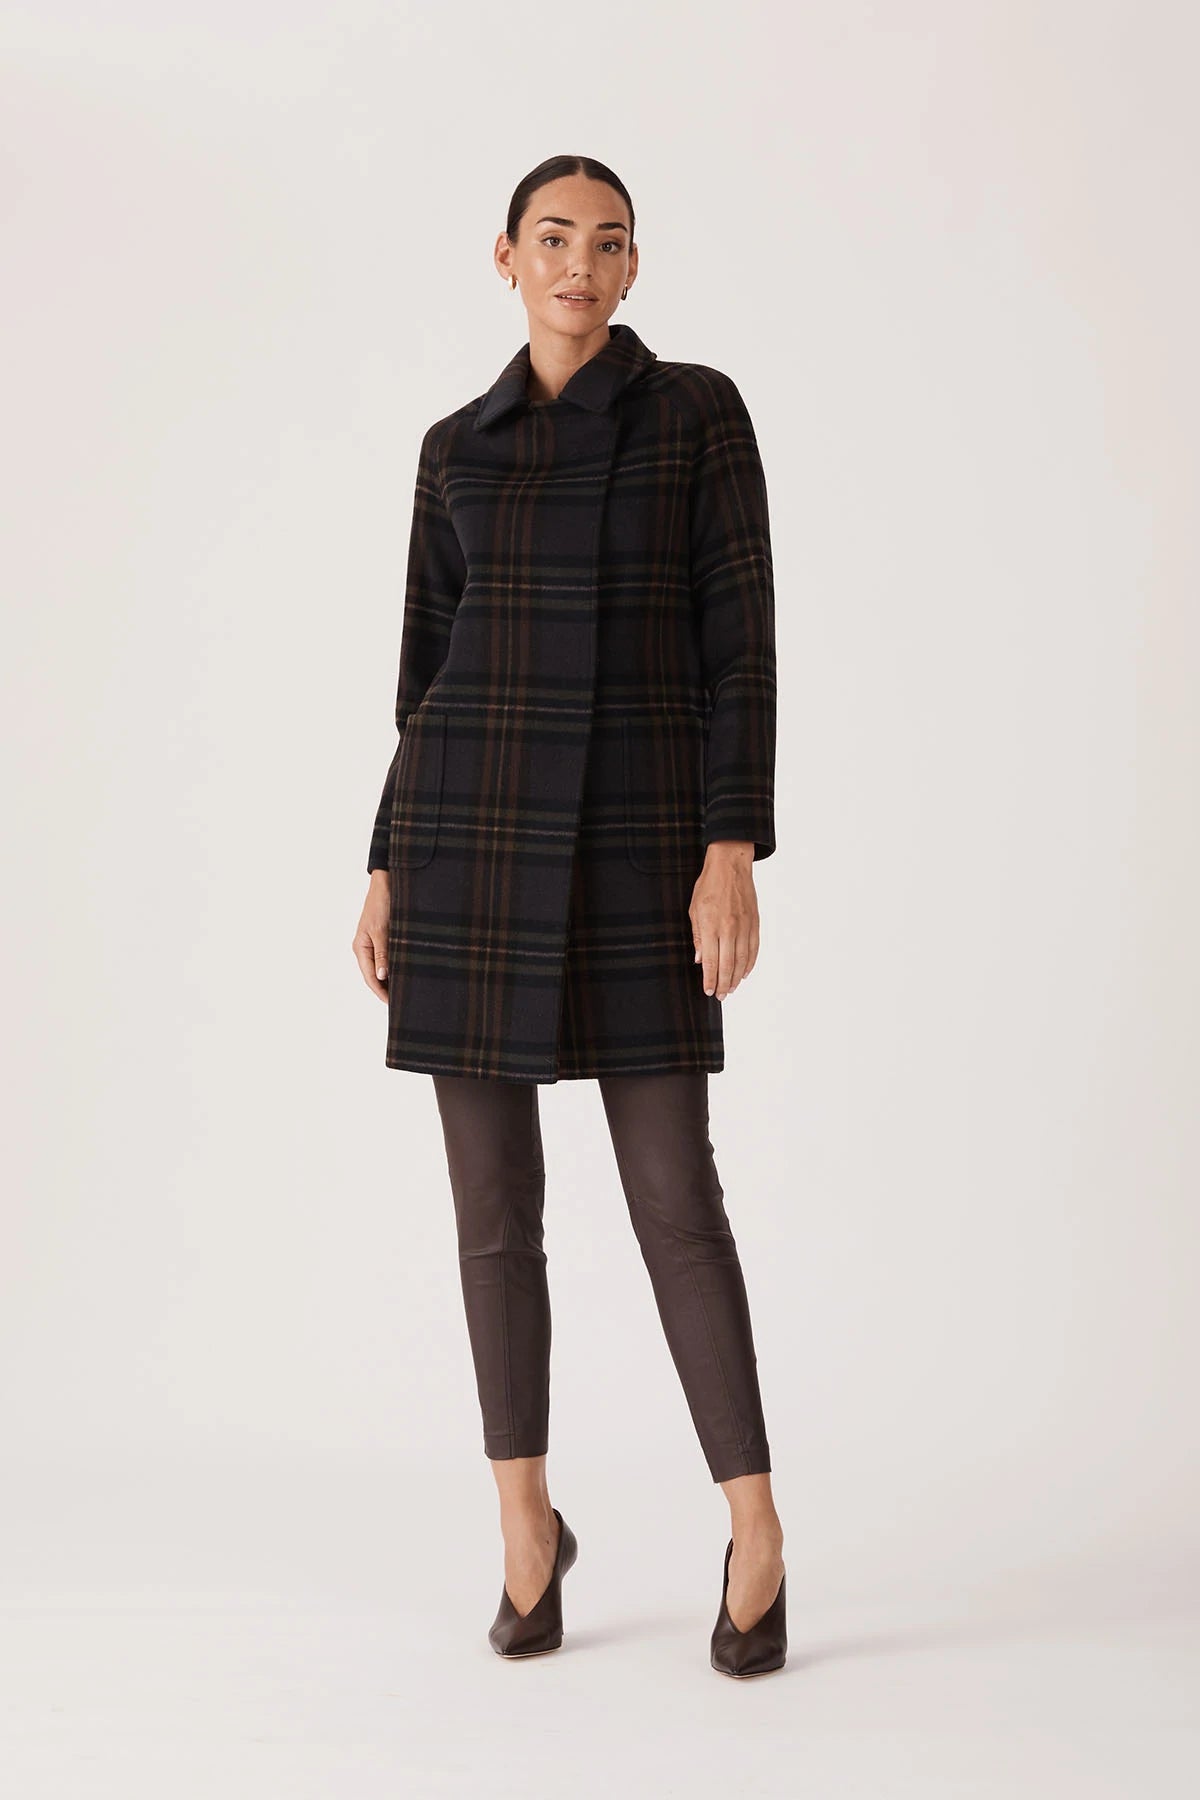 Highland Check Coat - After Hours Boutique